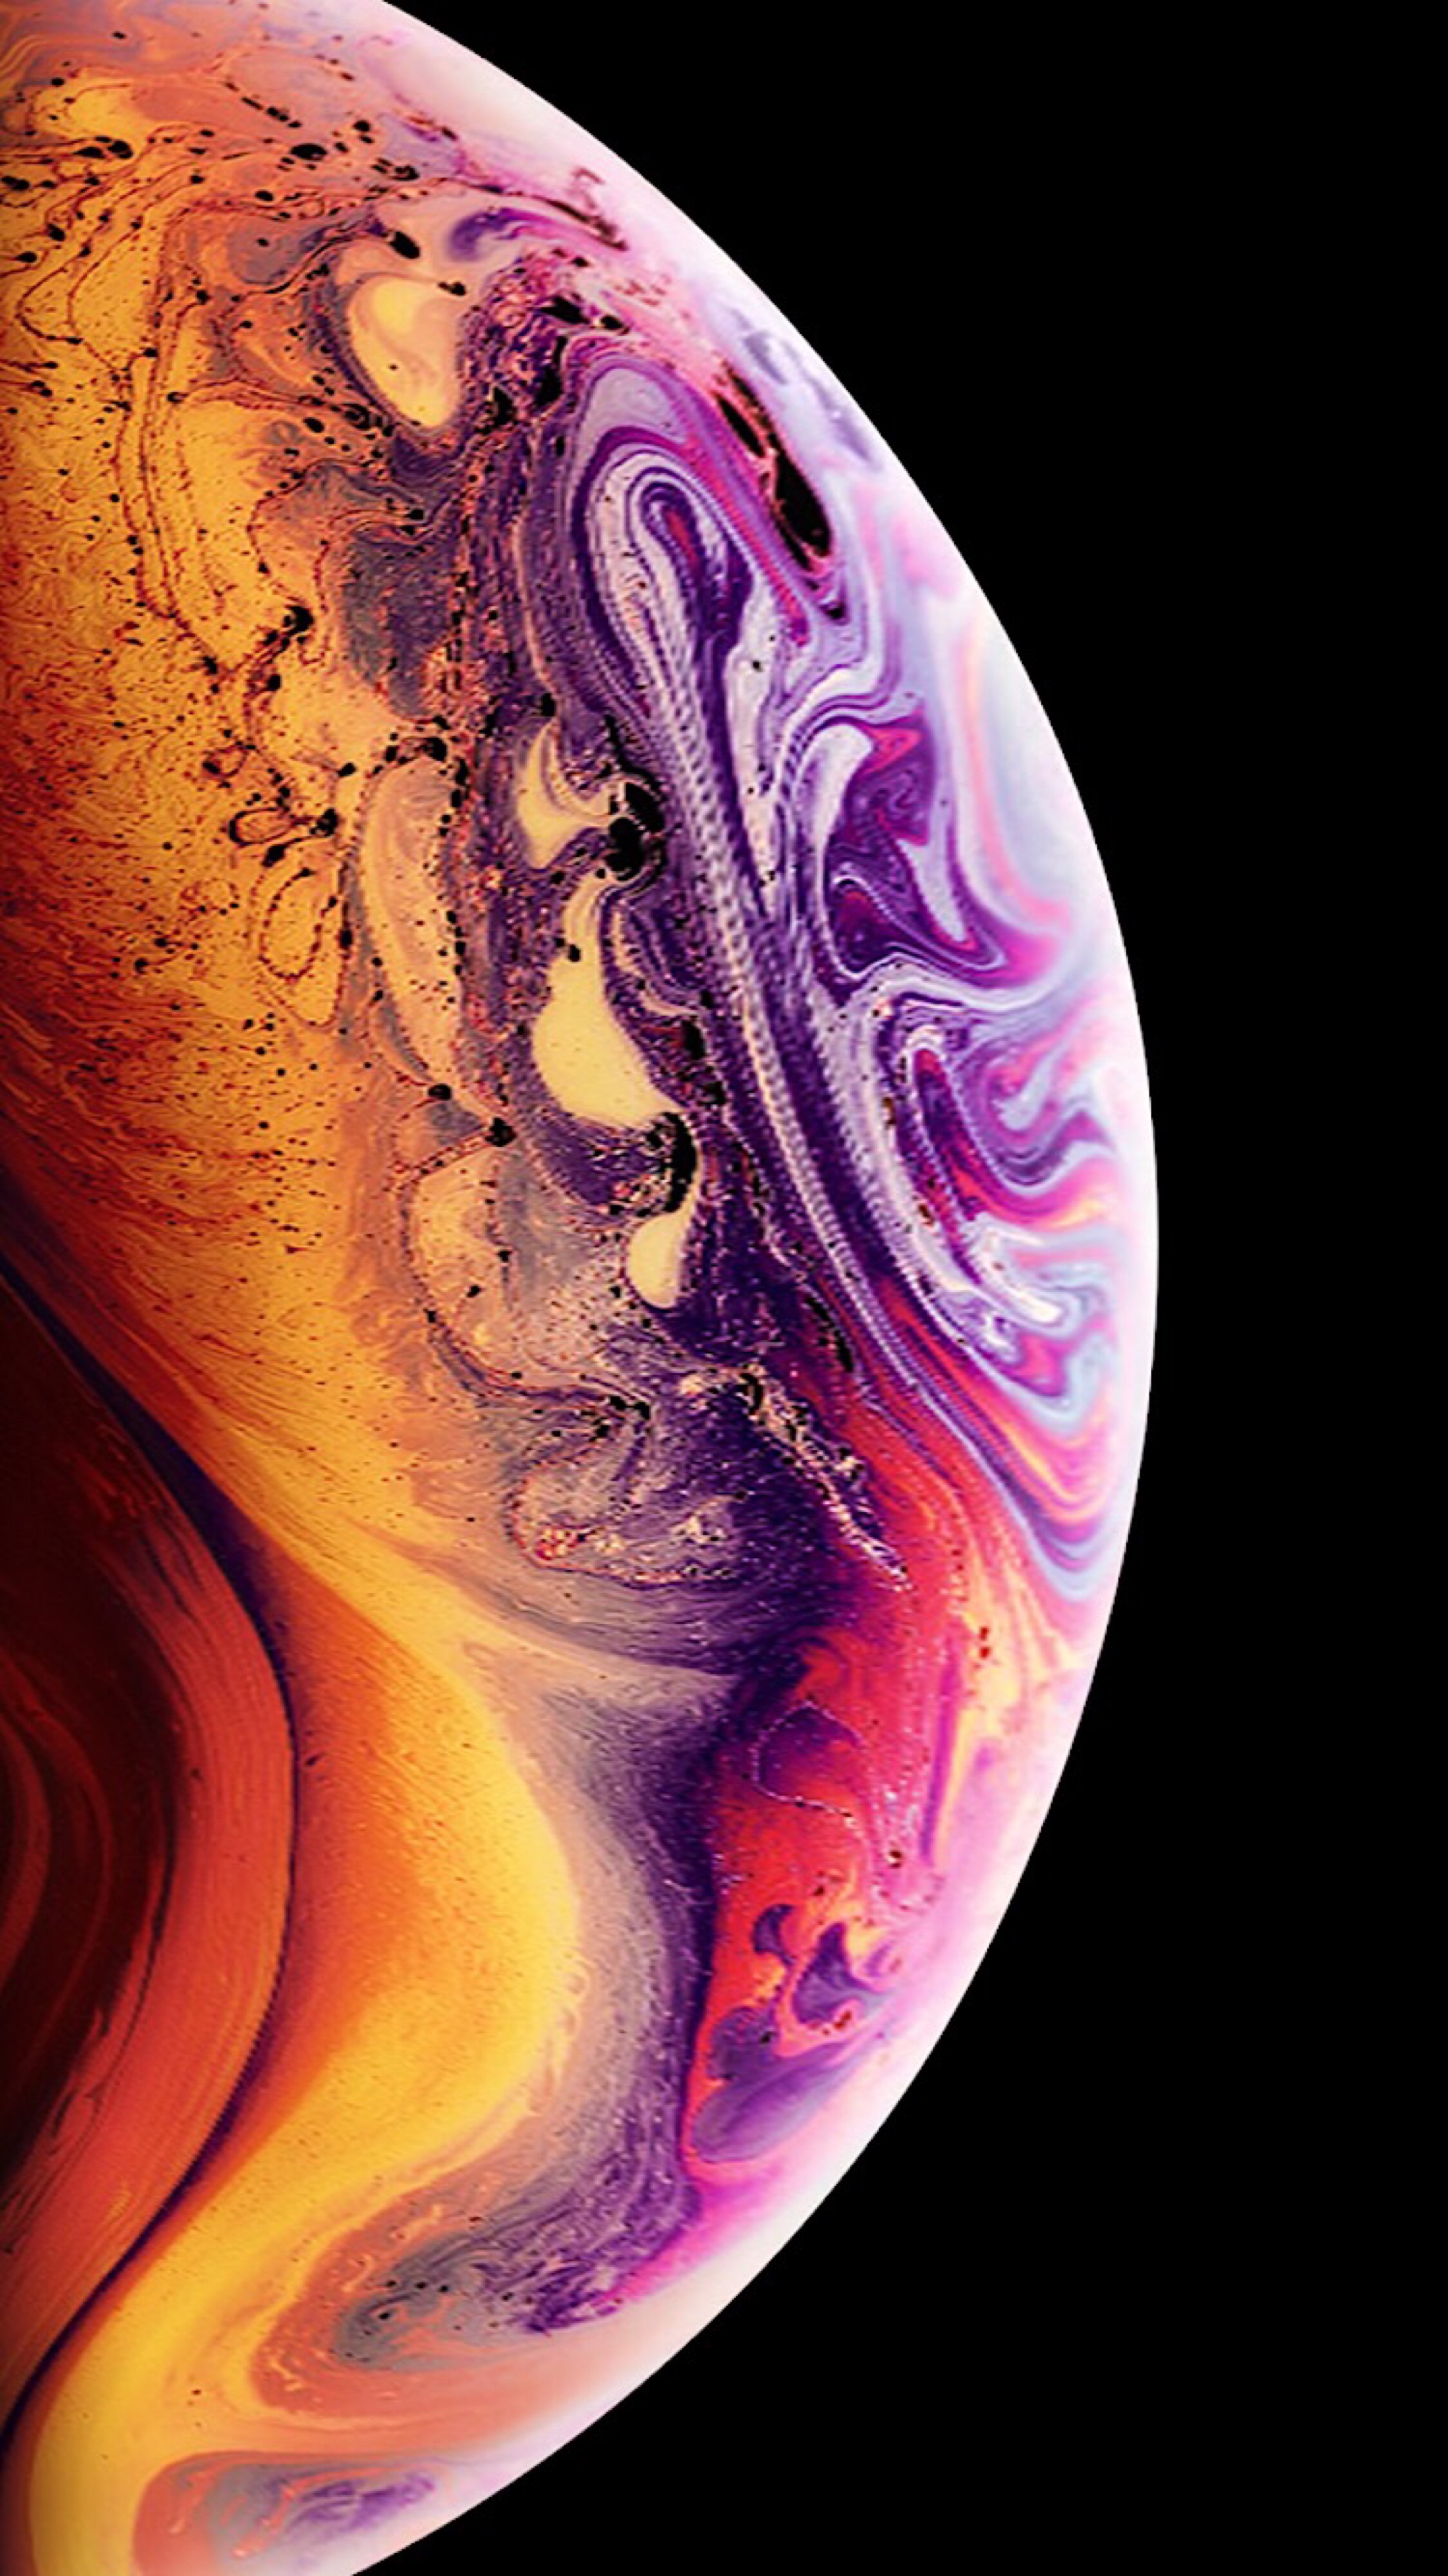 Download iPhone XS marketing wallpaper for any iPhone